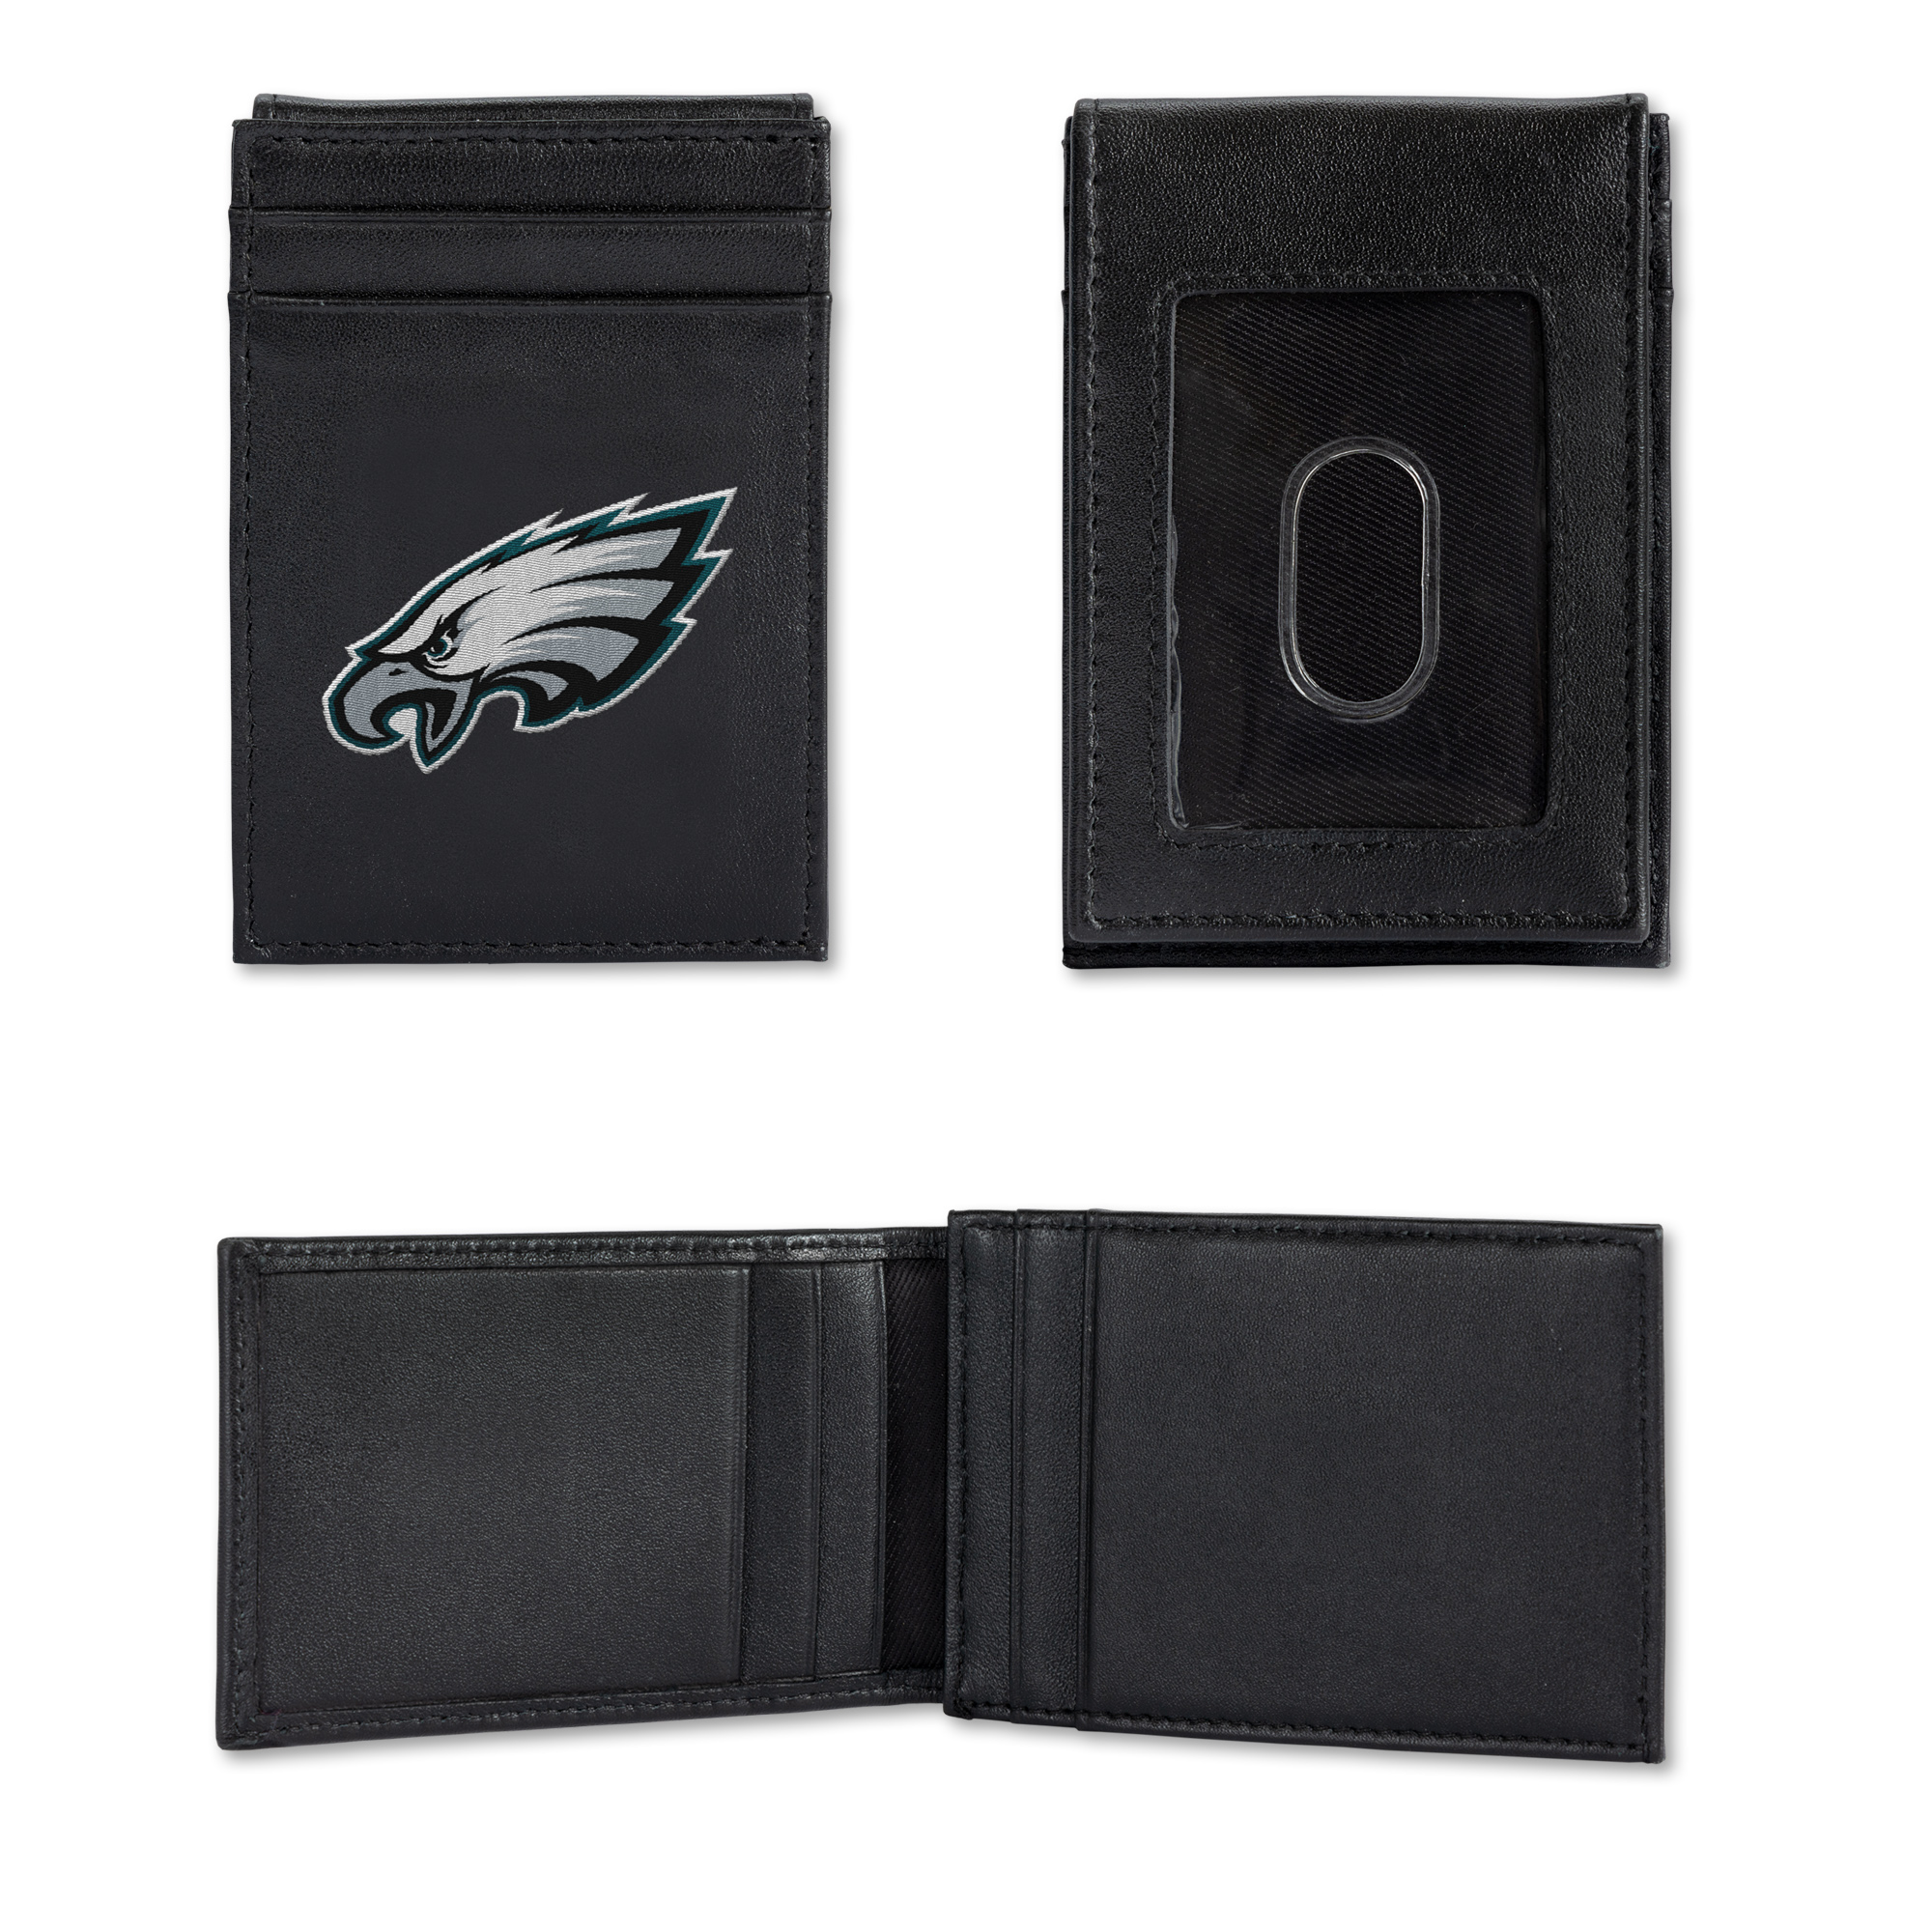 Rico NFL Rico Industries Philadelphia Eagles  Embroidered Front Pocket Wallet